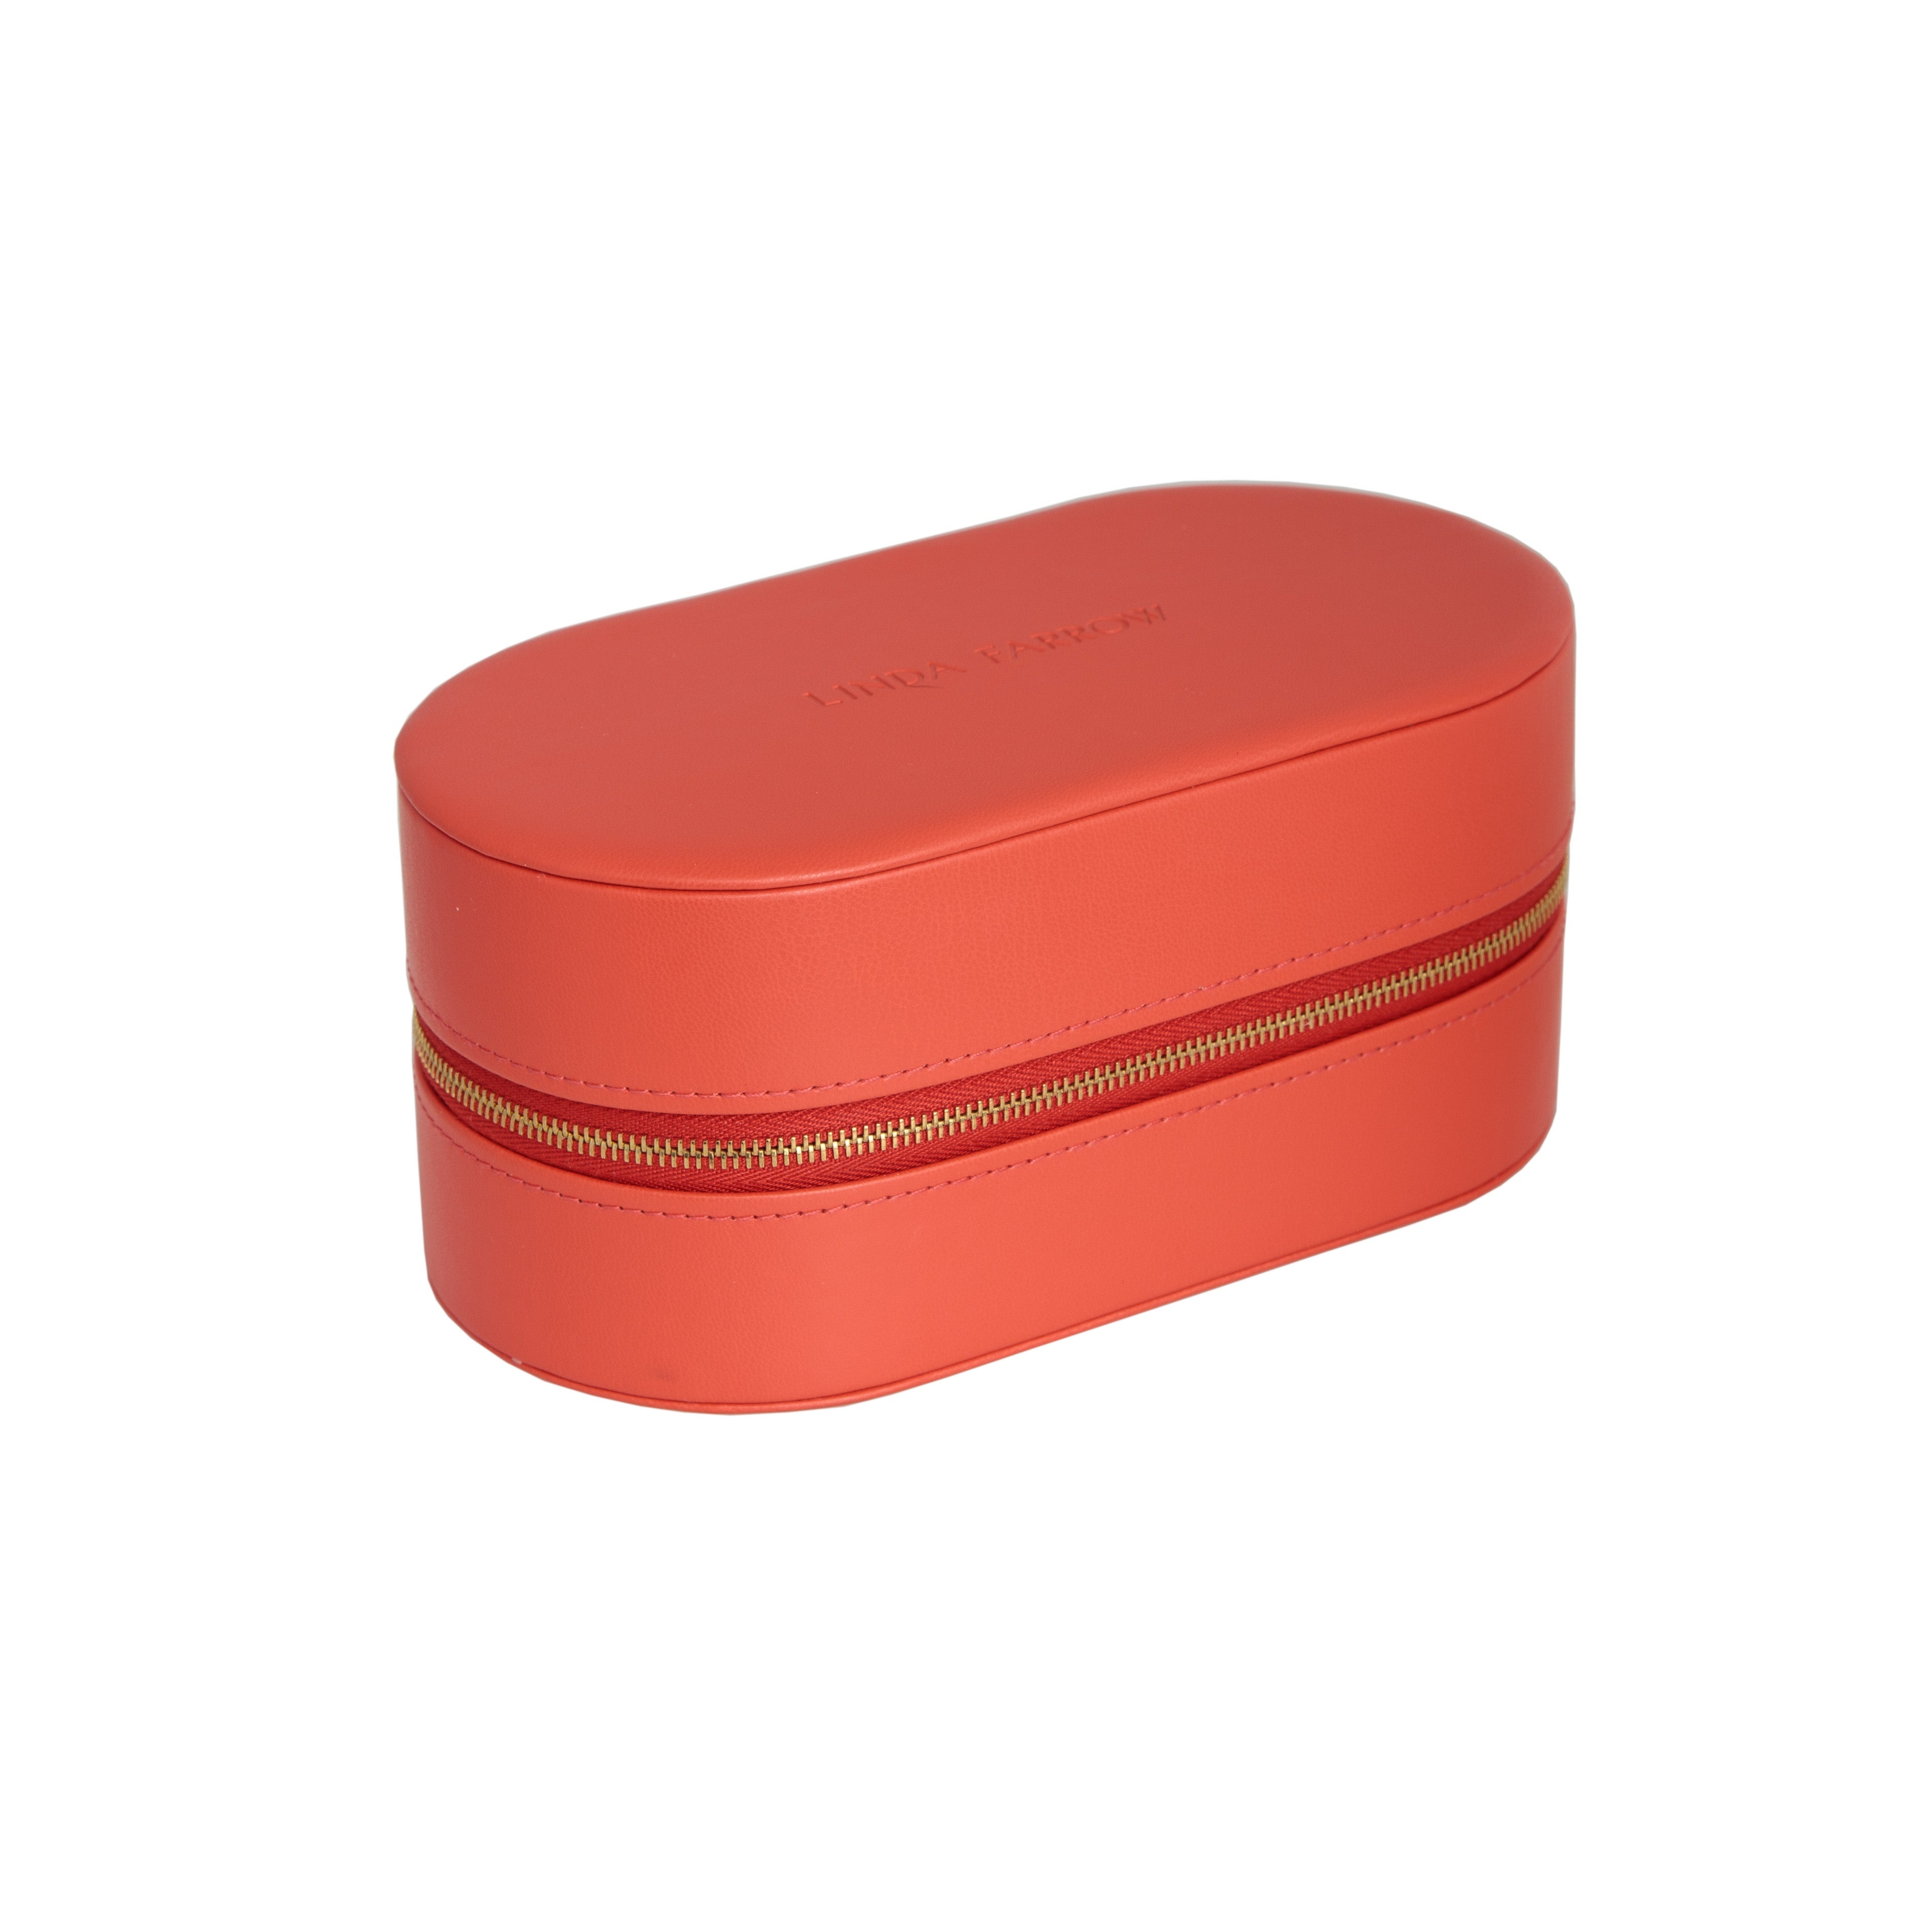 LINDA FARROW OVAL TRAVEL CASE IN CORAL - 2